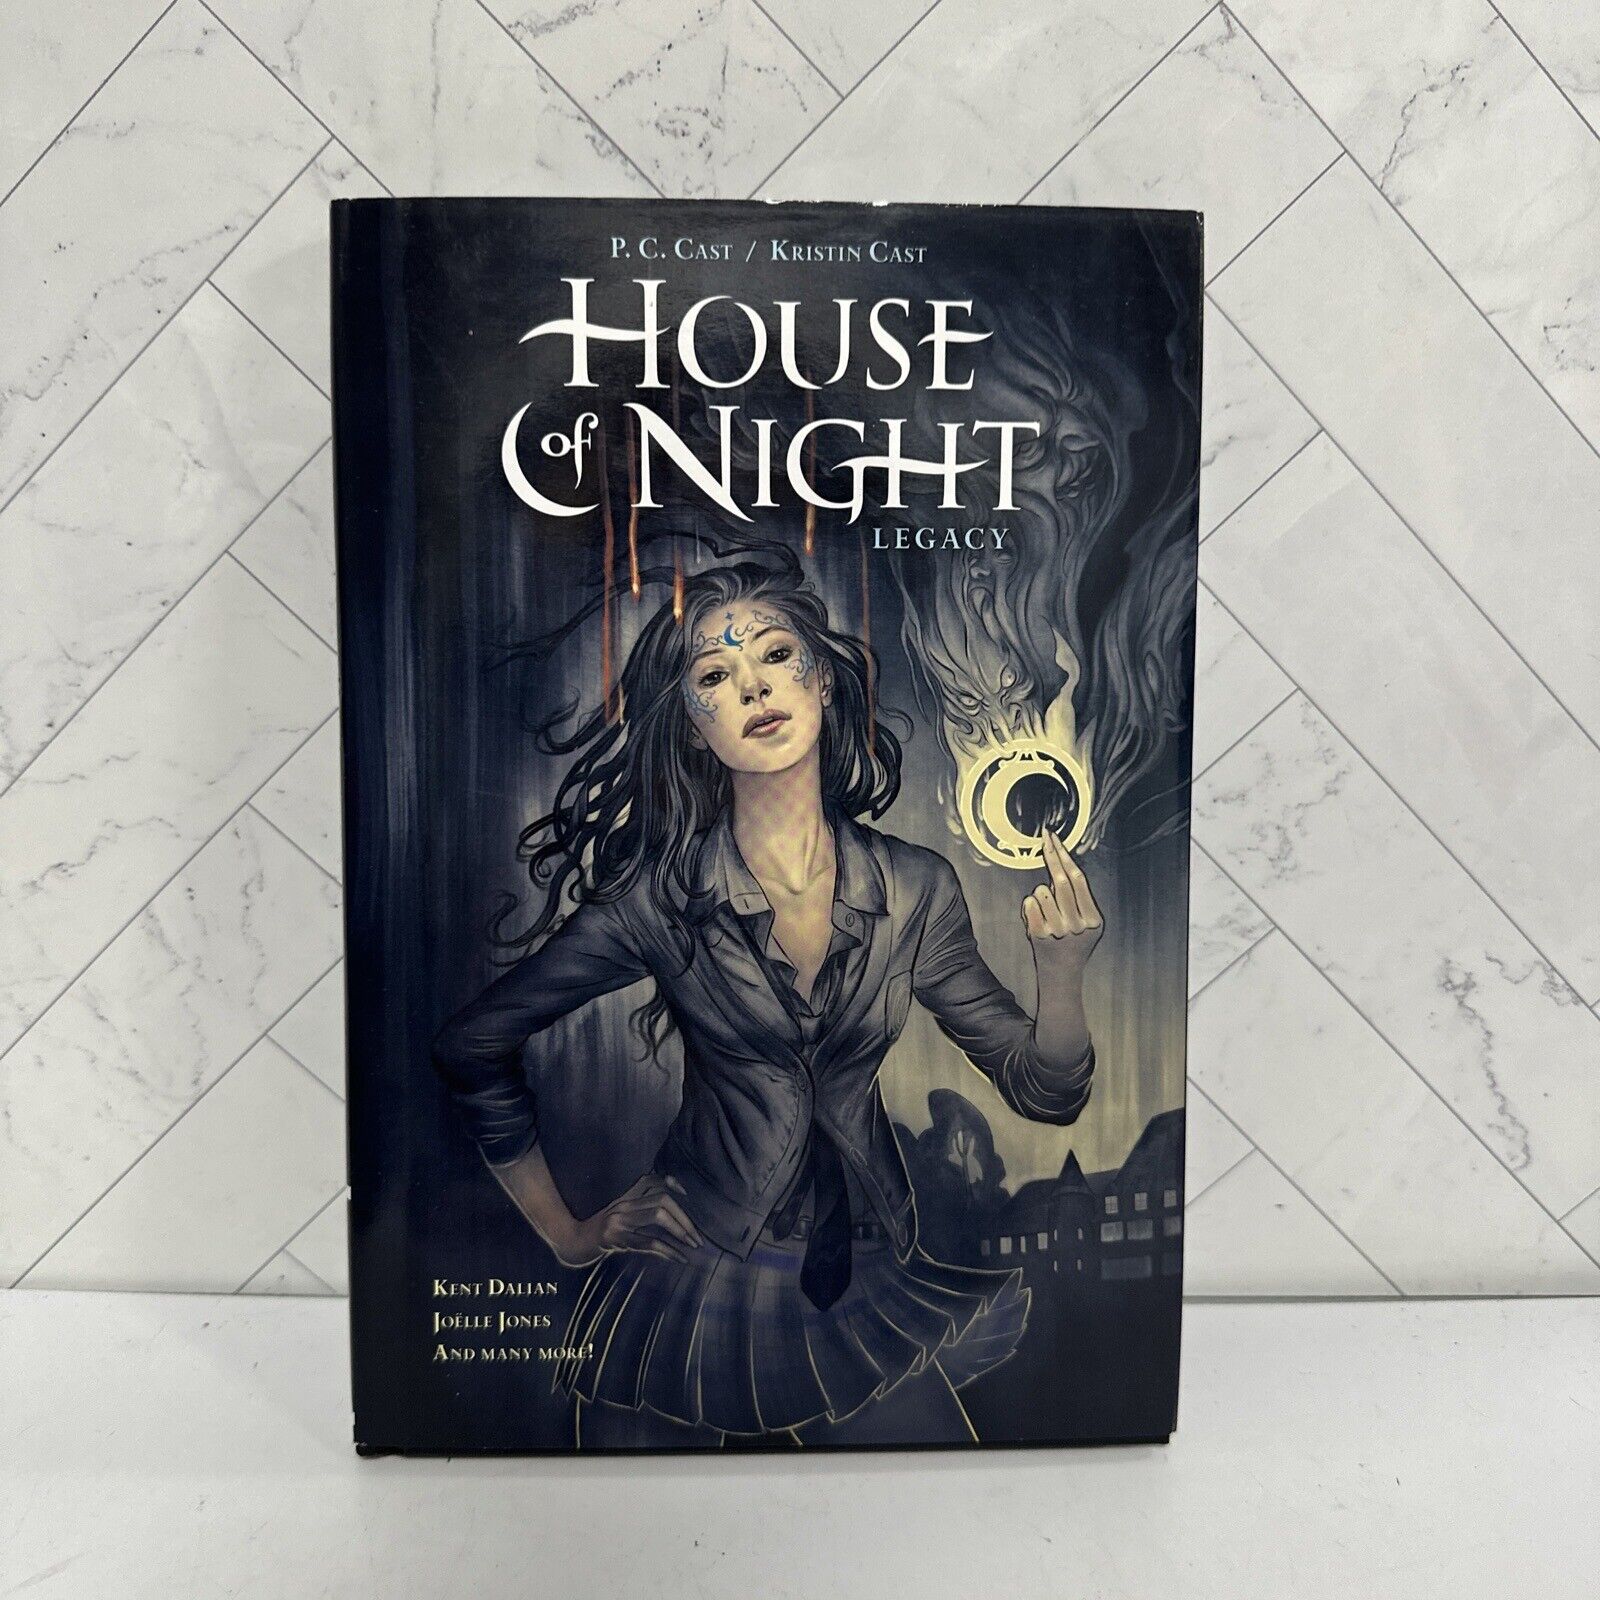 House of Night - Legacy Hardcover New